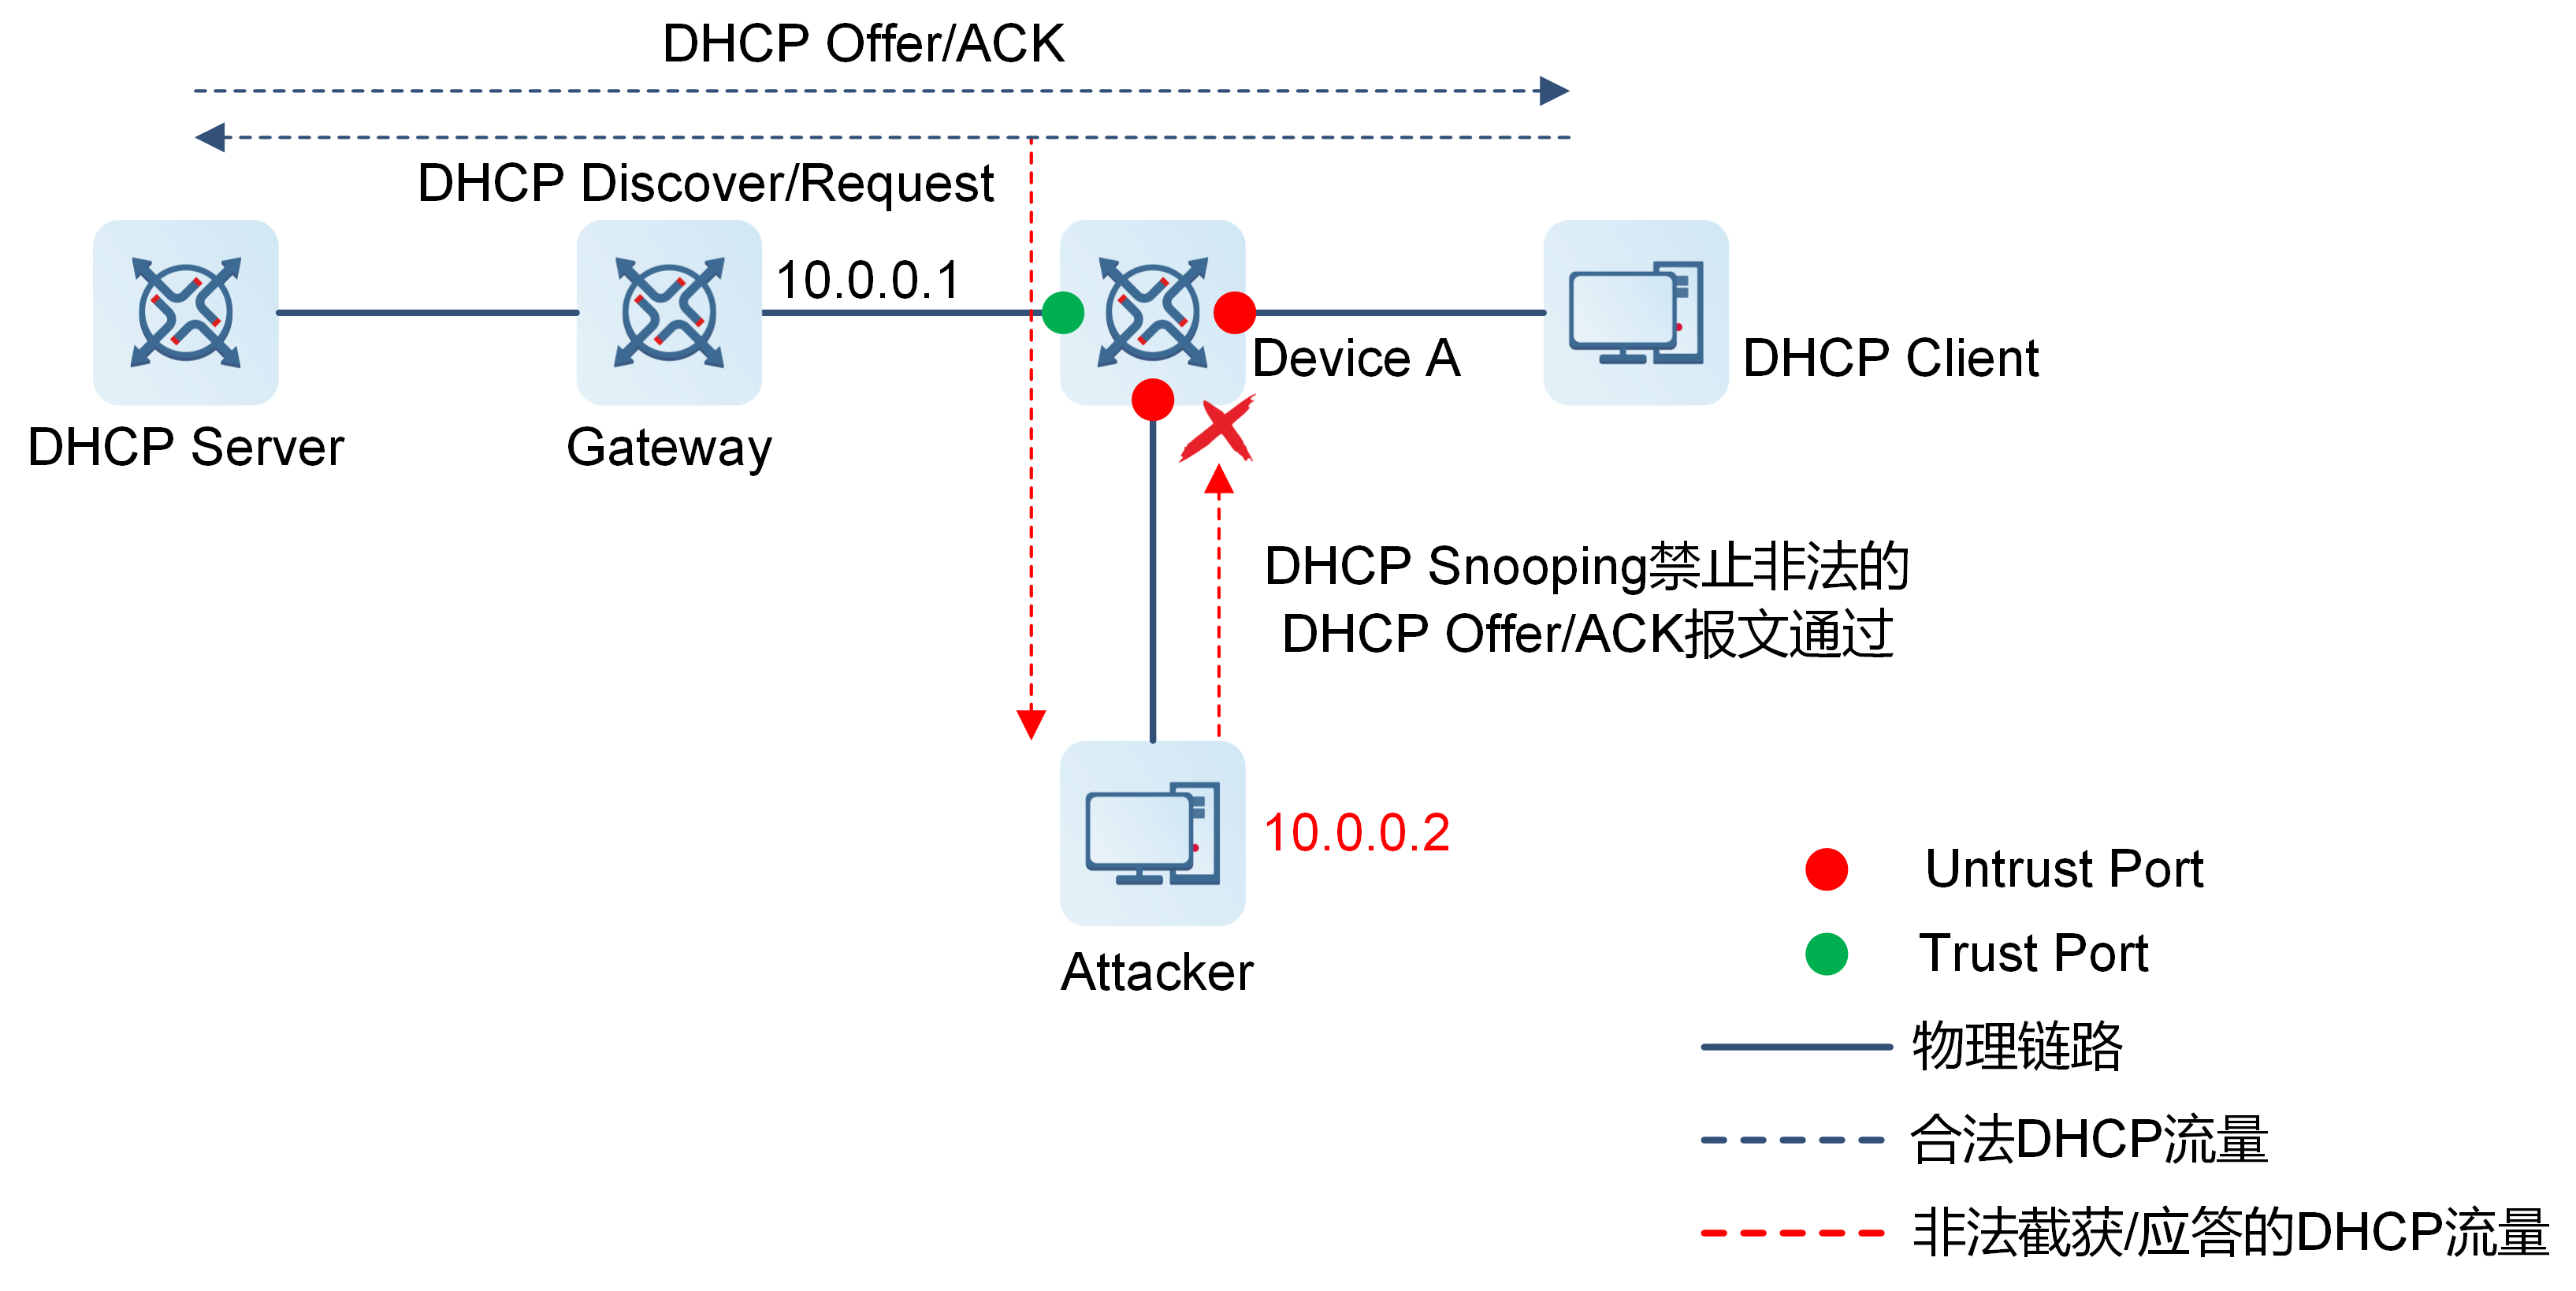 DHCP Snooping防止DHCP欺骗攻击示意图